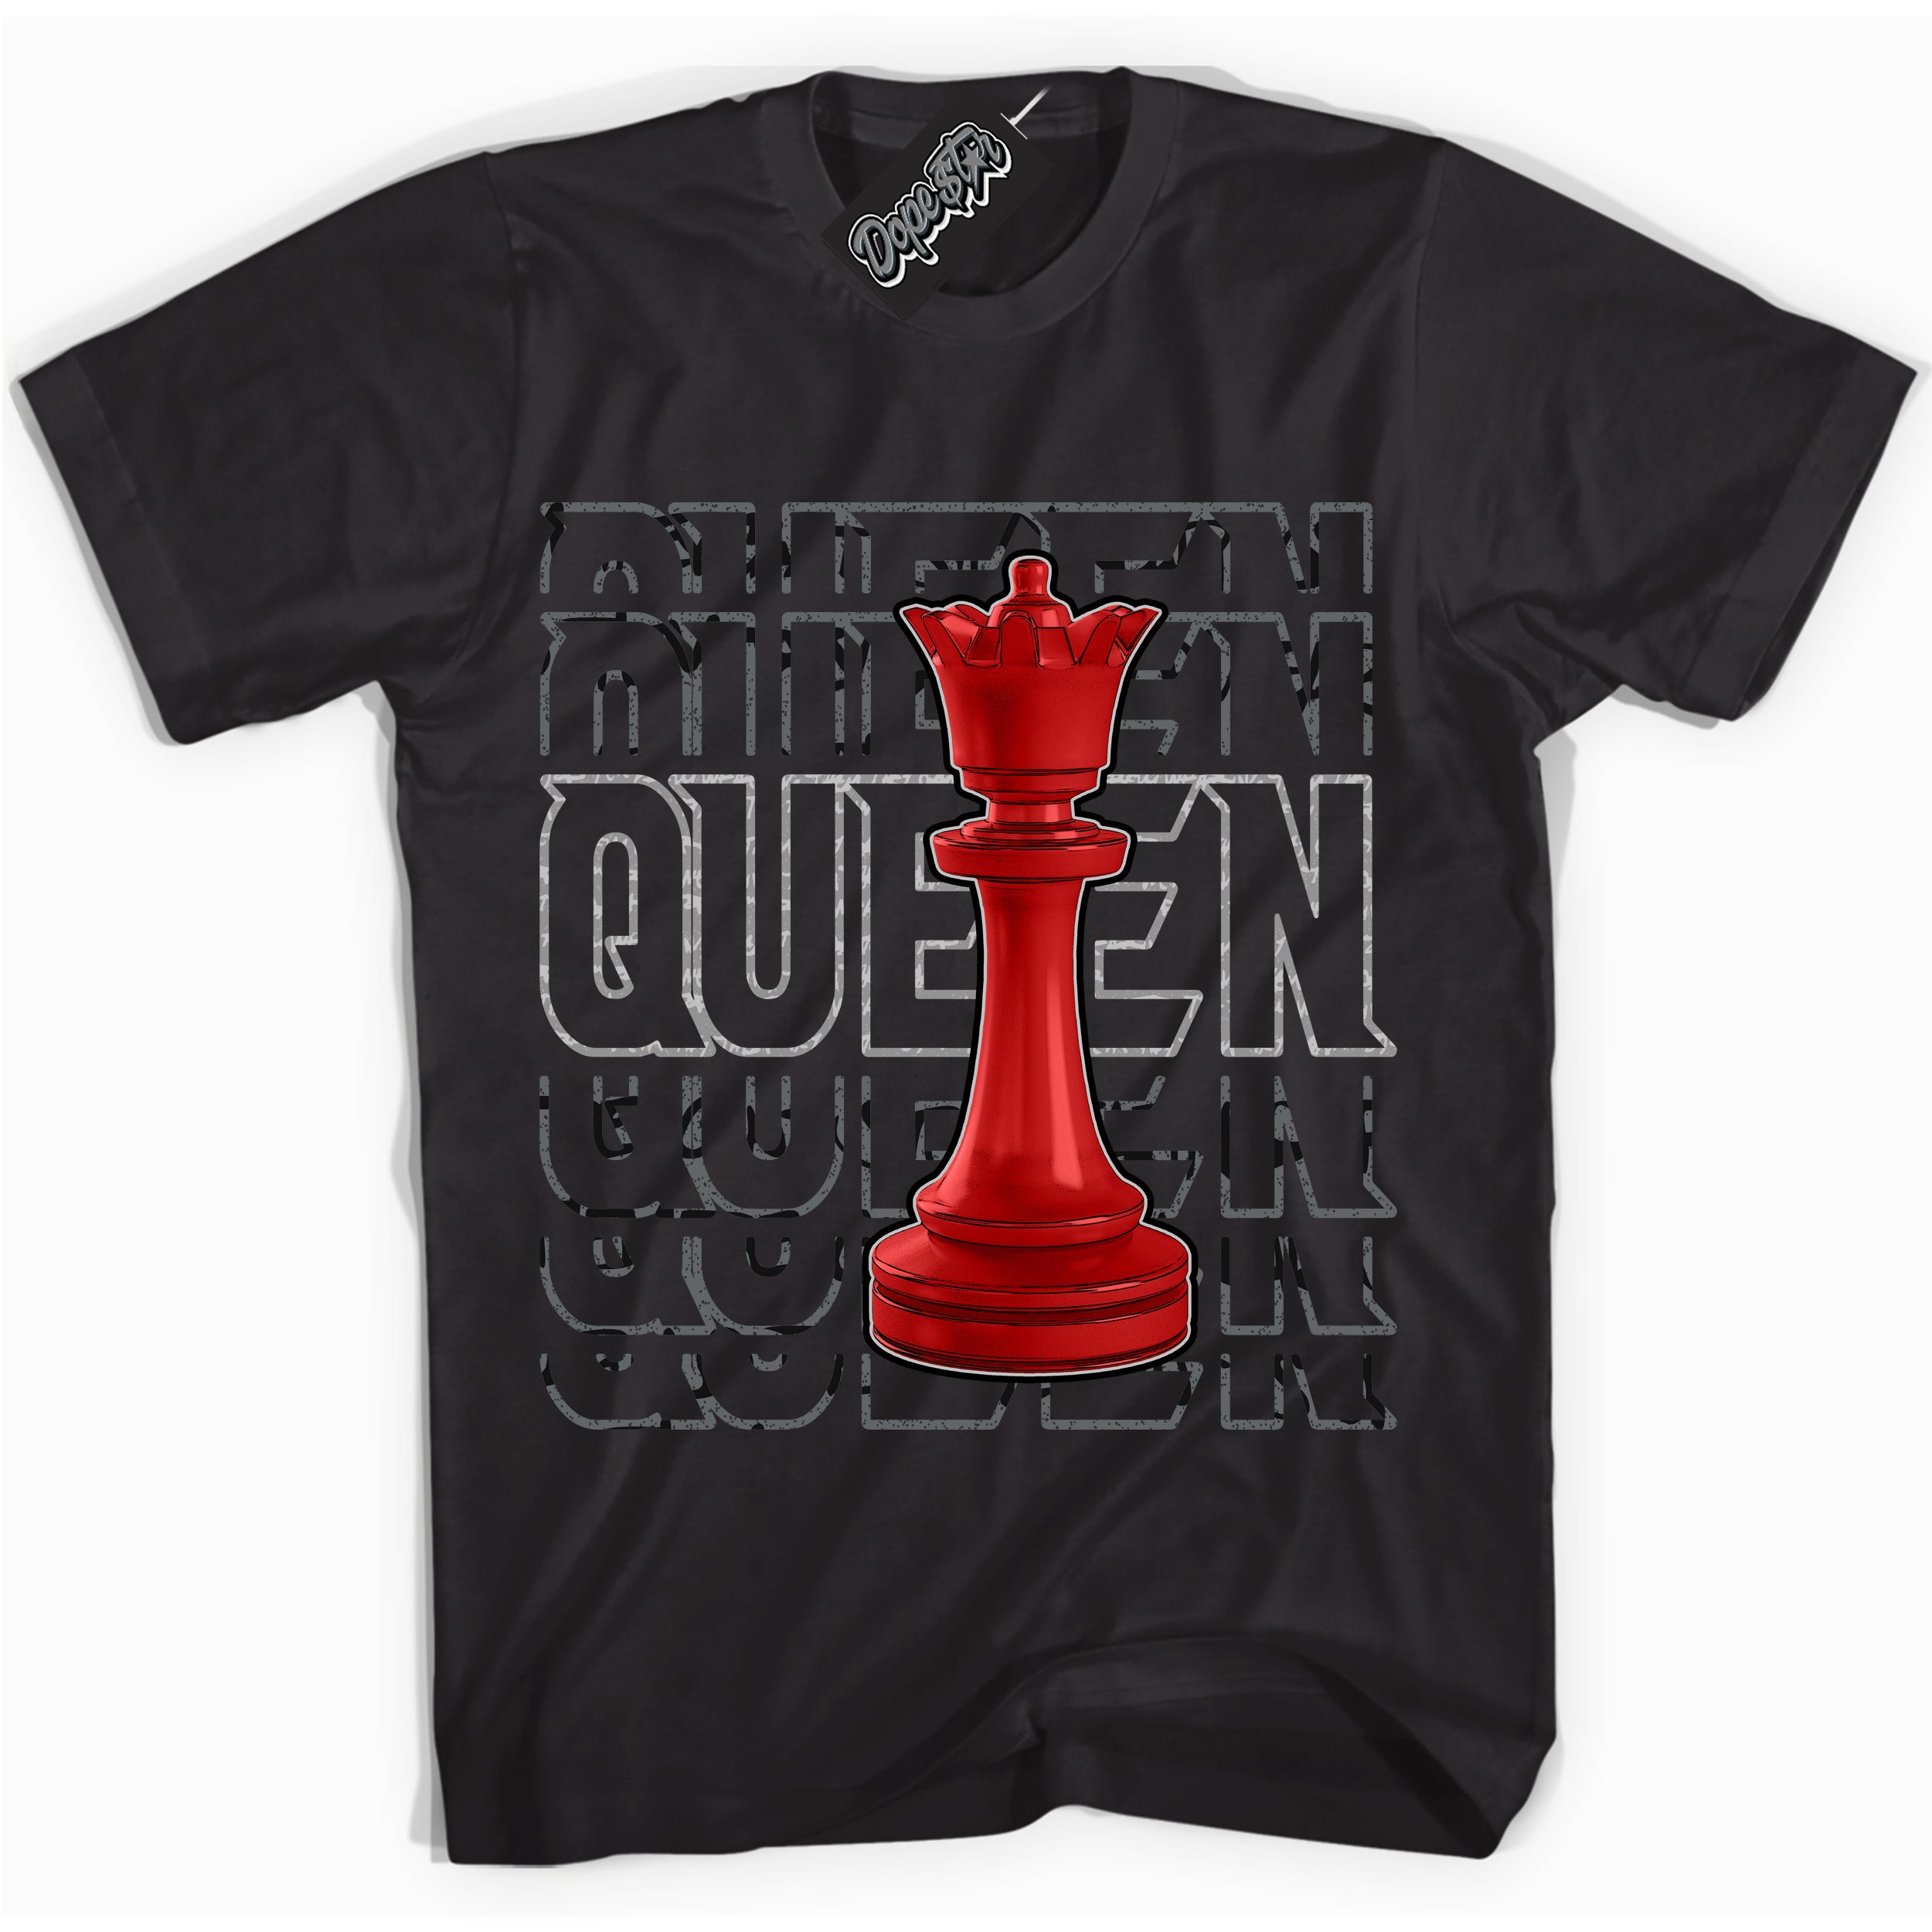 Cool Black Shirt with “ Queen Chess ” design that perfectly matches Rebellionaire 1s Sneakers.